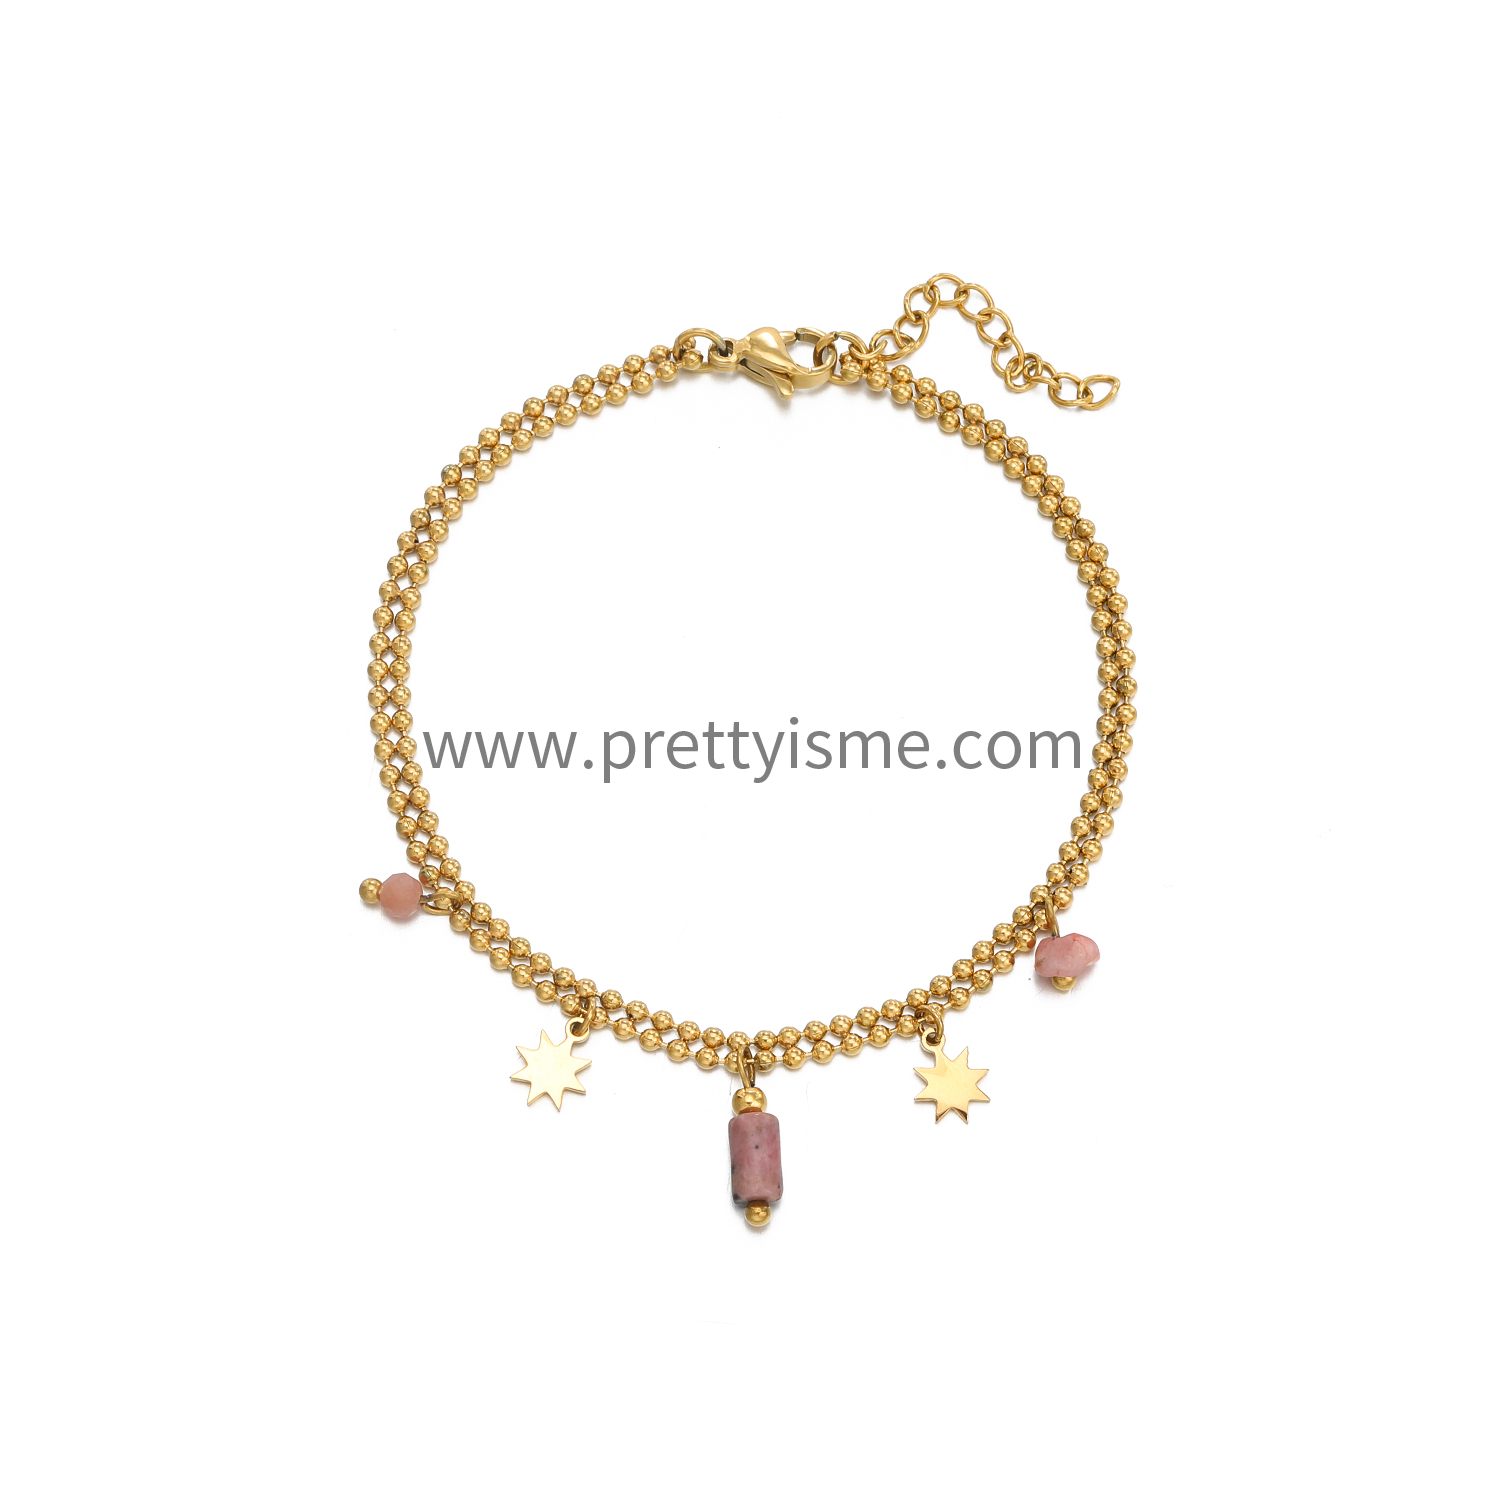 Double Bracelet with Stainless Steel Small Gold Beads and Pink Stones (5).webp